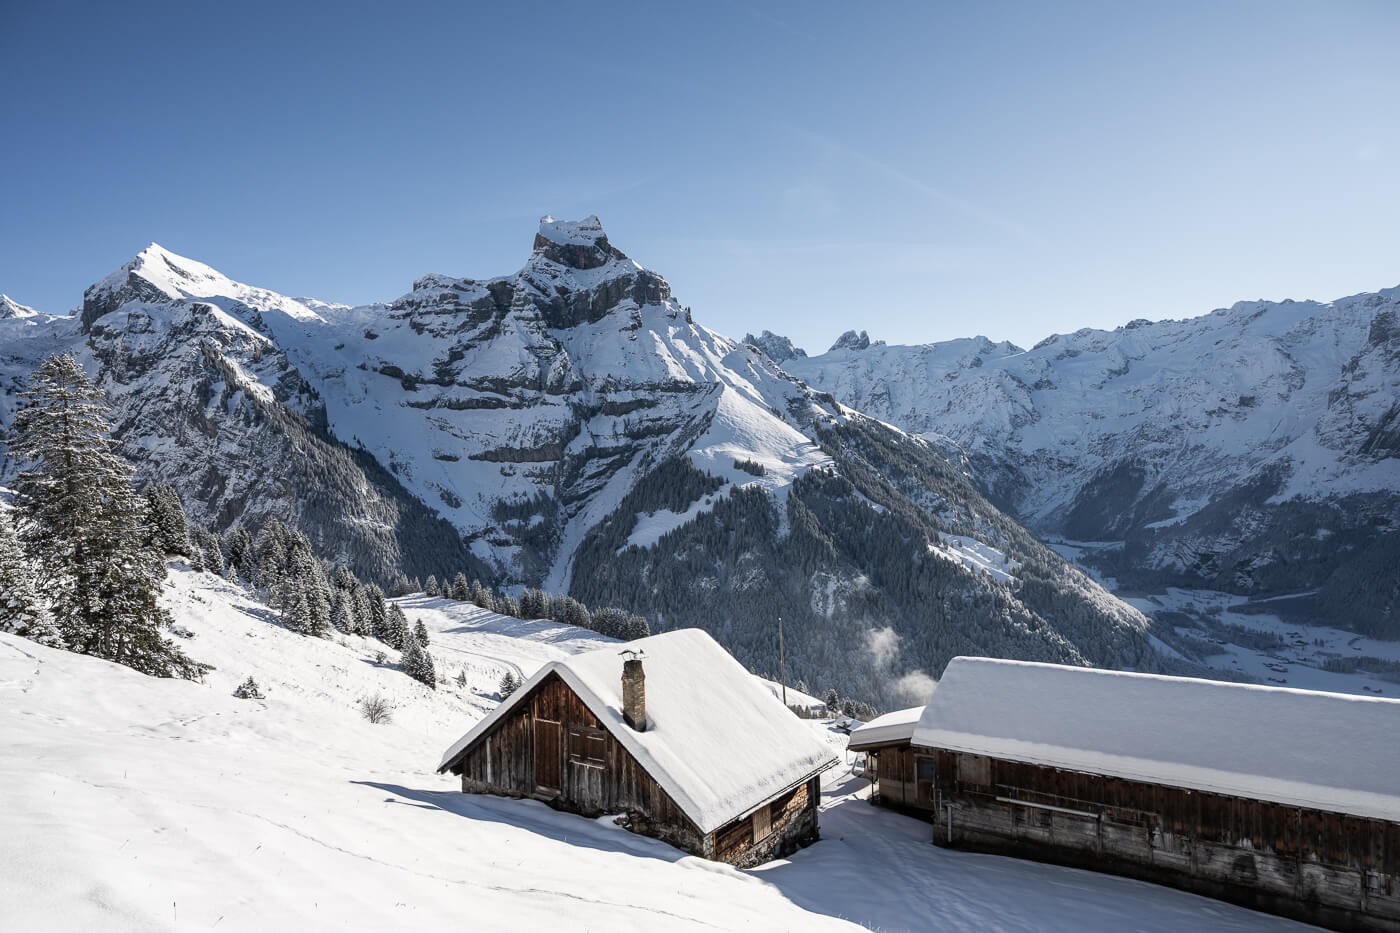 Snowshoeing in Engelberg Ristis, huts along the trail with snowy mountains in the background.